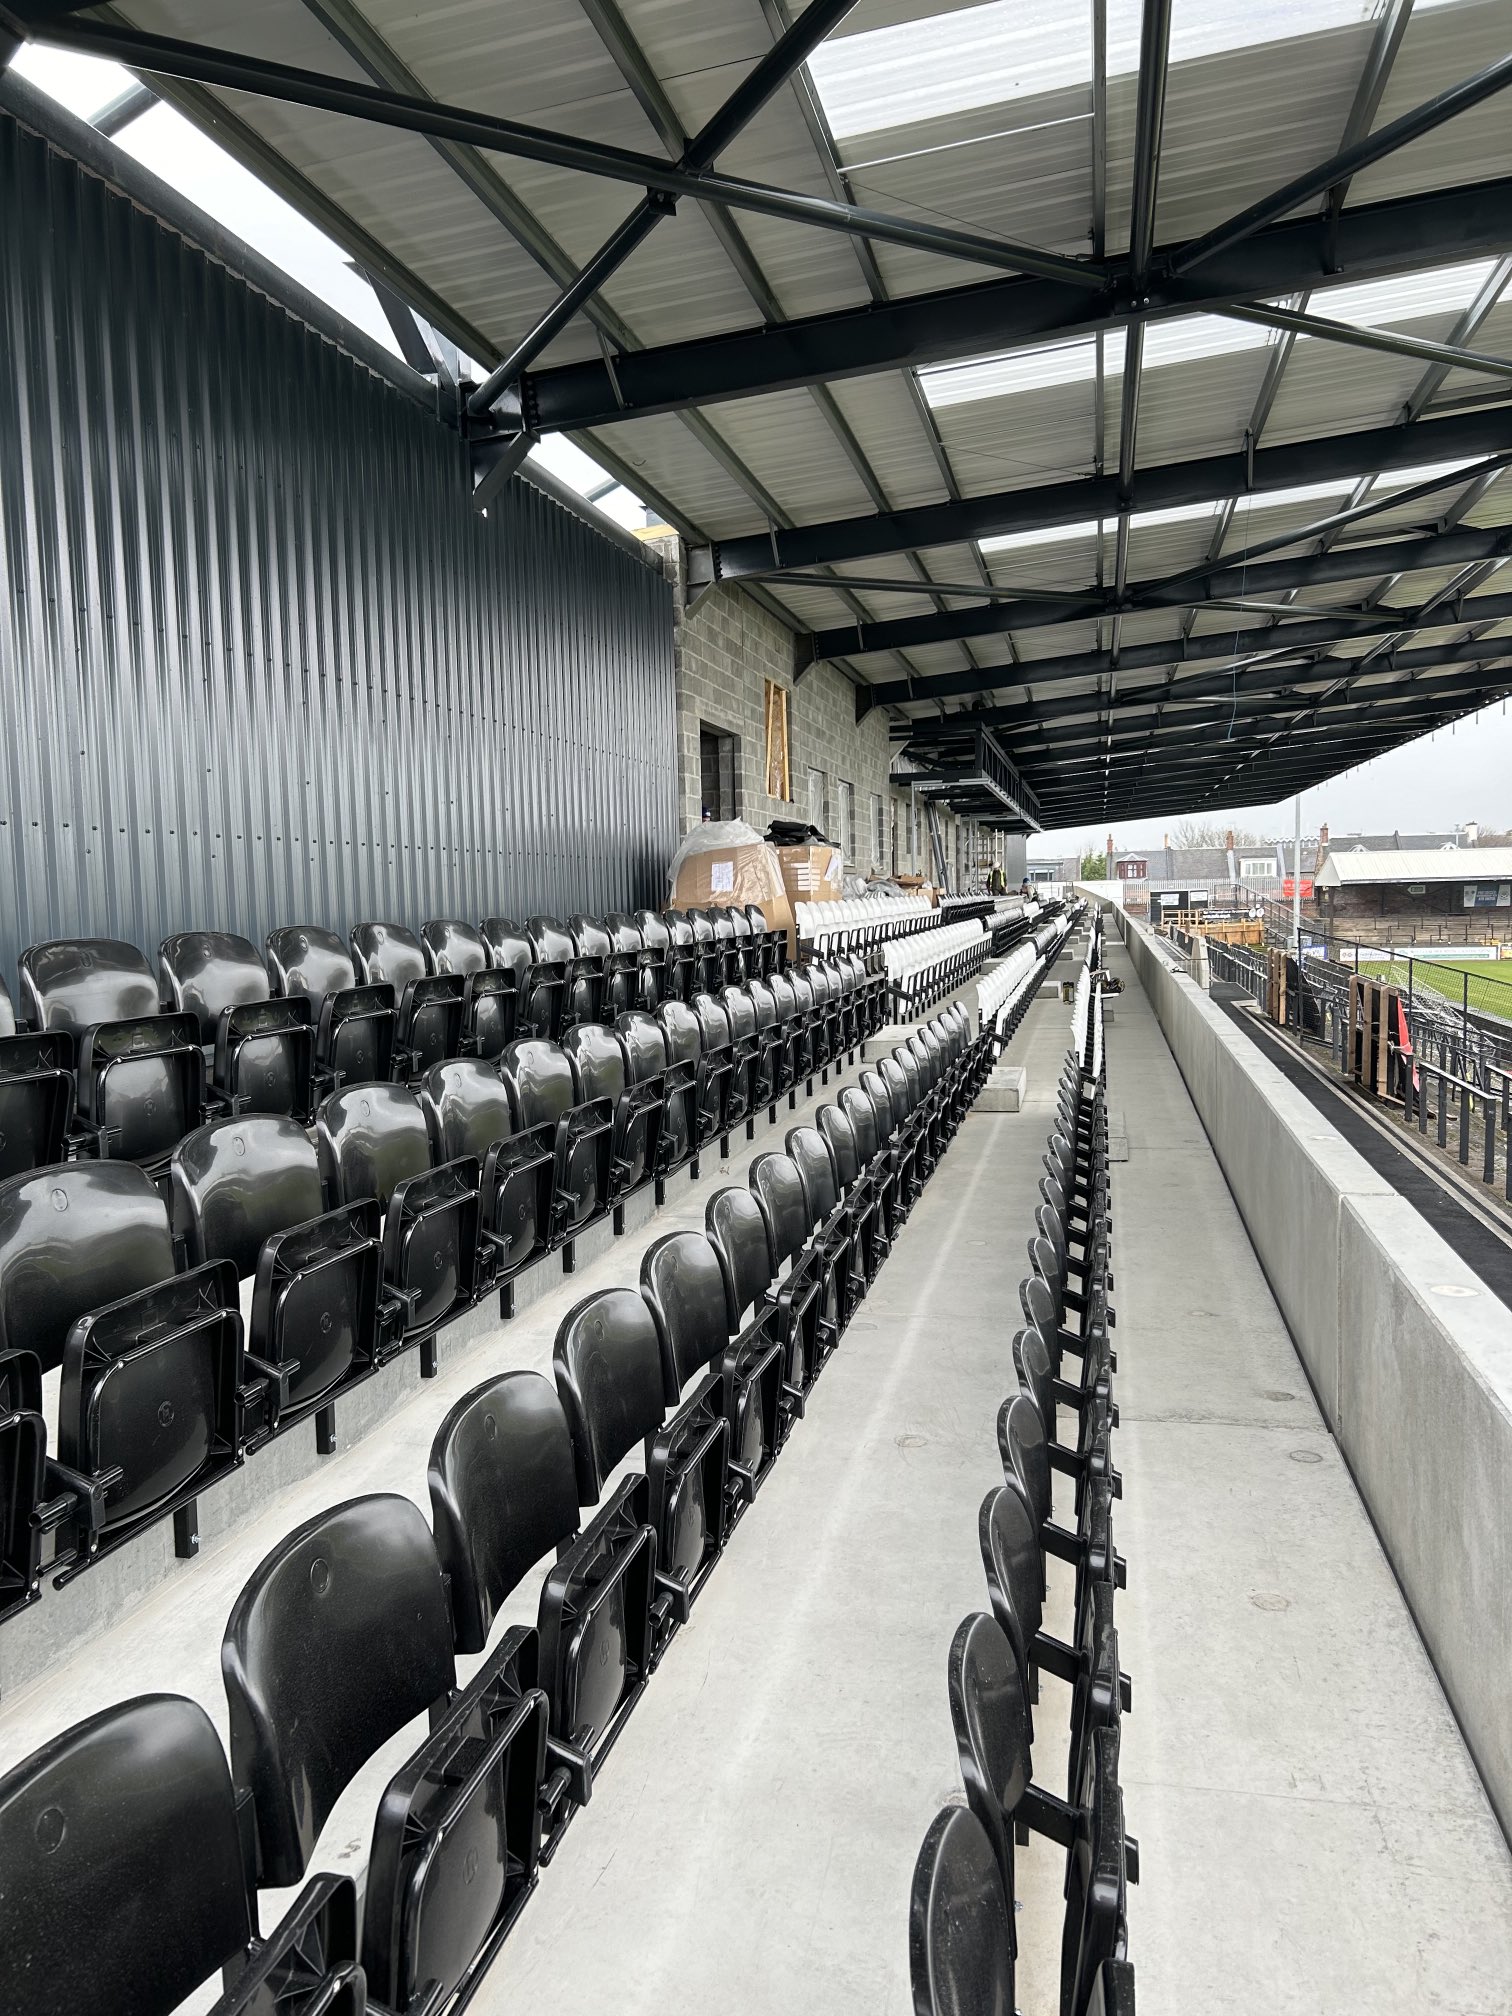 Clancy has designs on new North Stand at Somerset Park